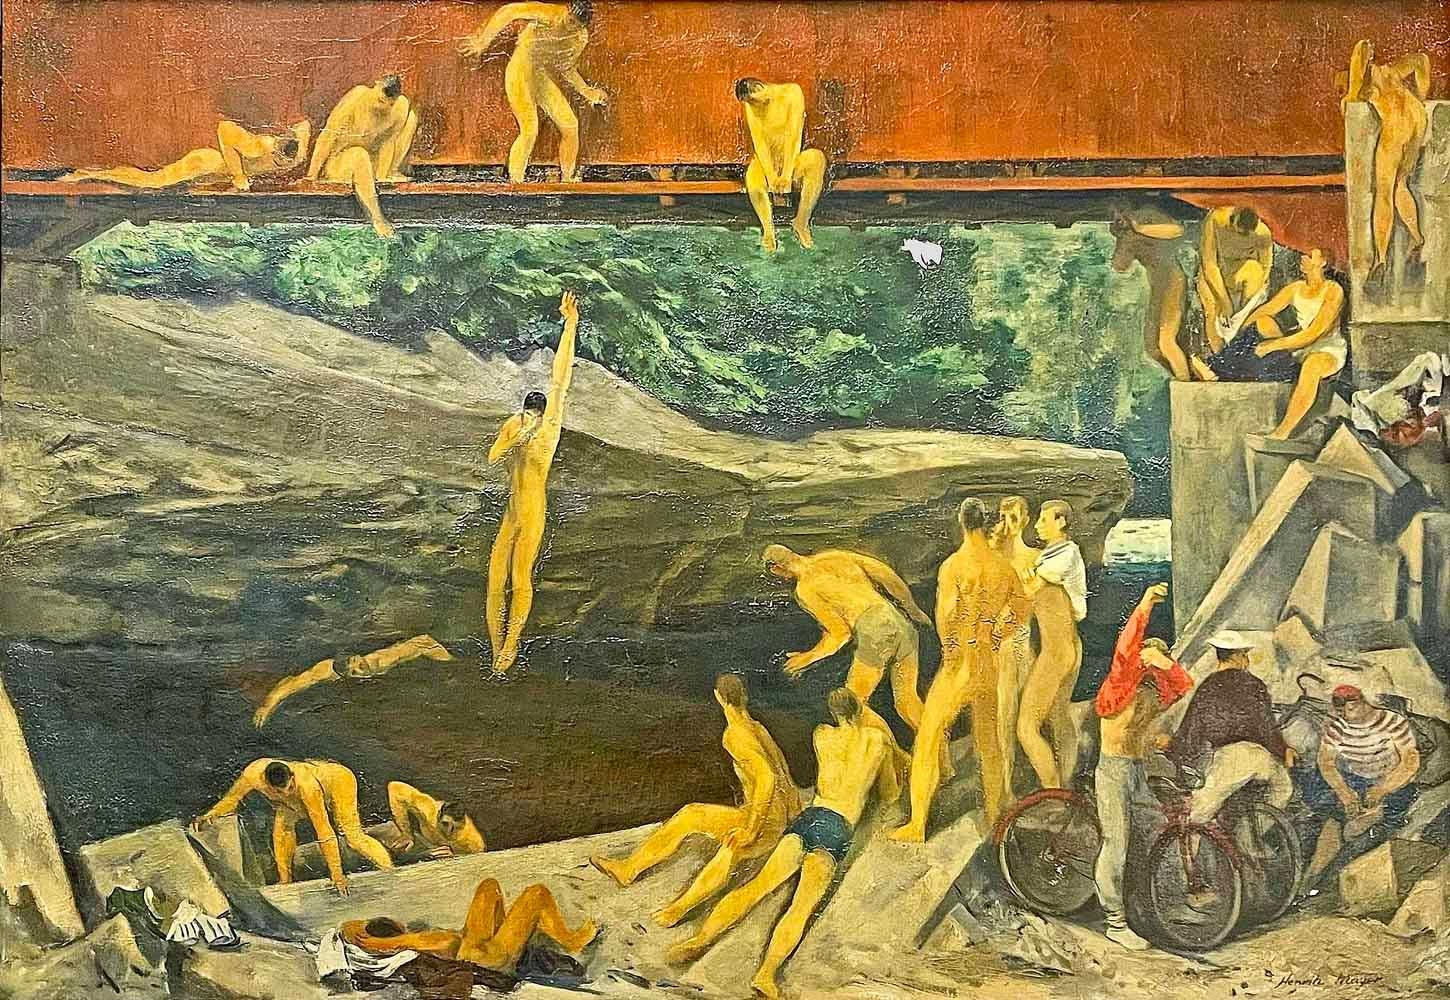 Large and striking, this ambitious scene of a swimming hole teeming with young men, largely nude and unselfconscious, who are enjoying the cooling effect of a rocky refuge and deep water on a hot day, was painted by Henrik Mayer in 1944. The twenty